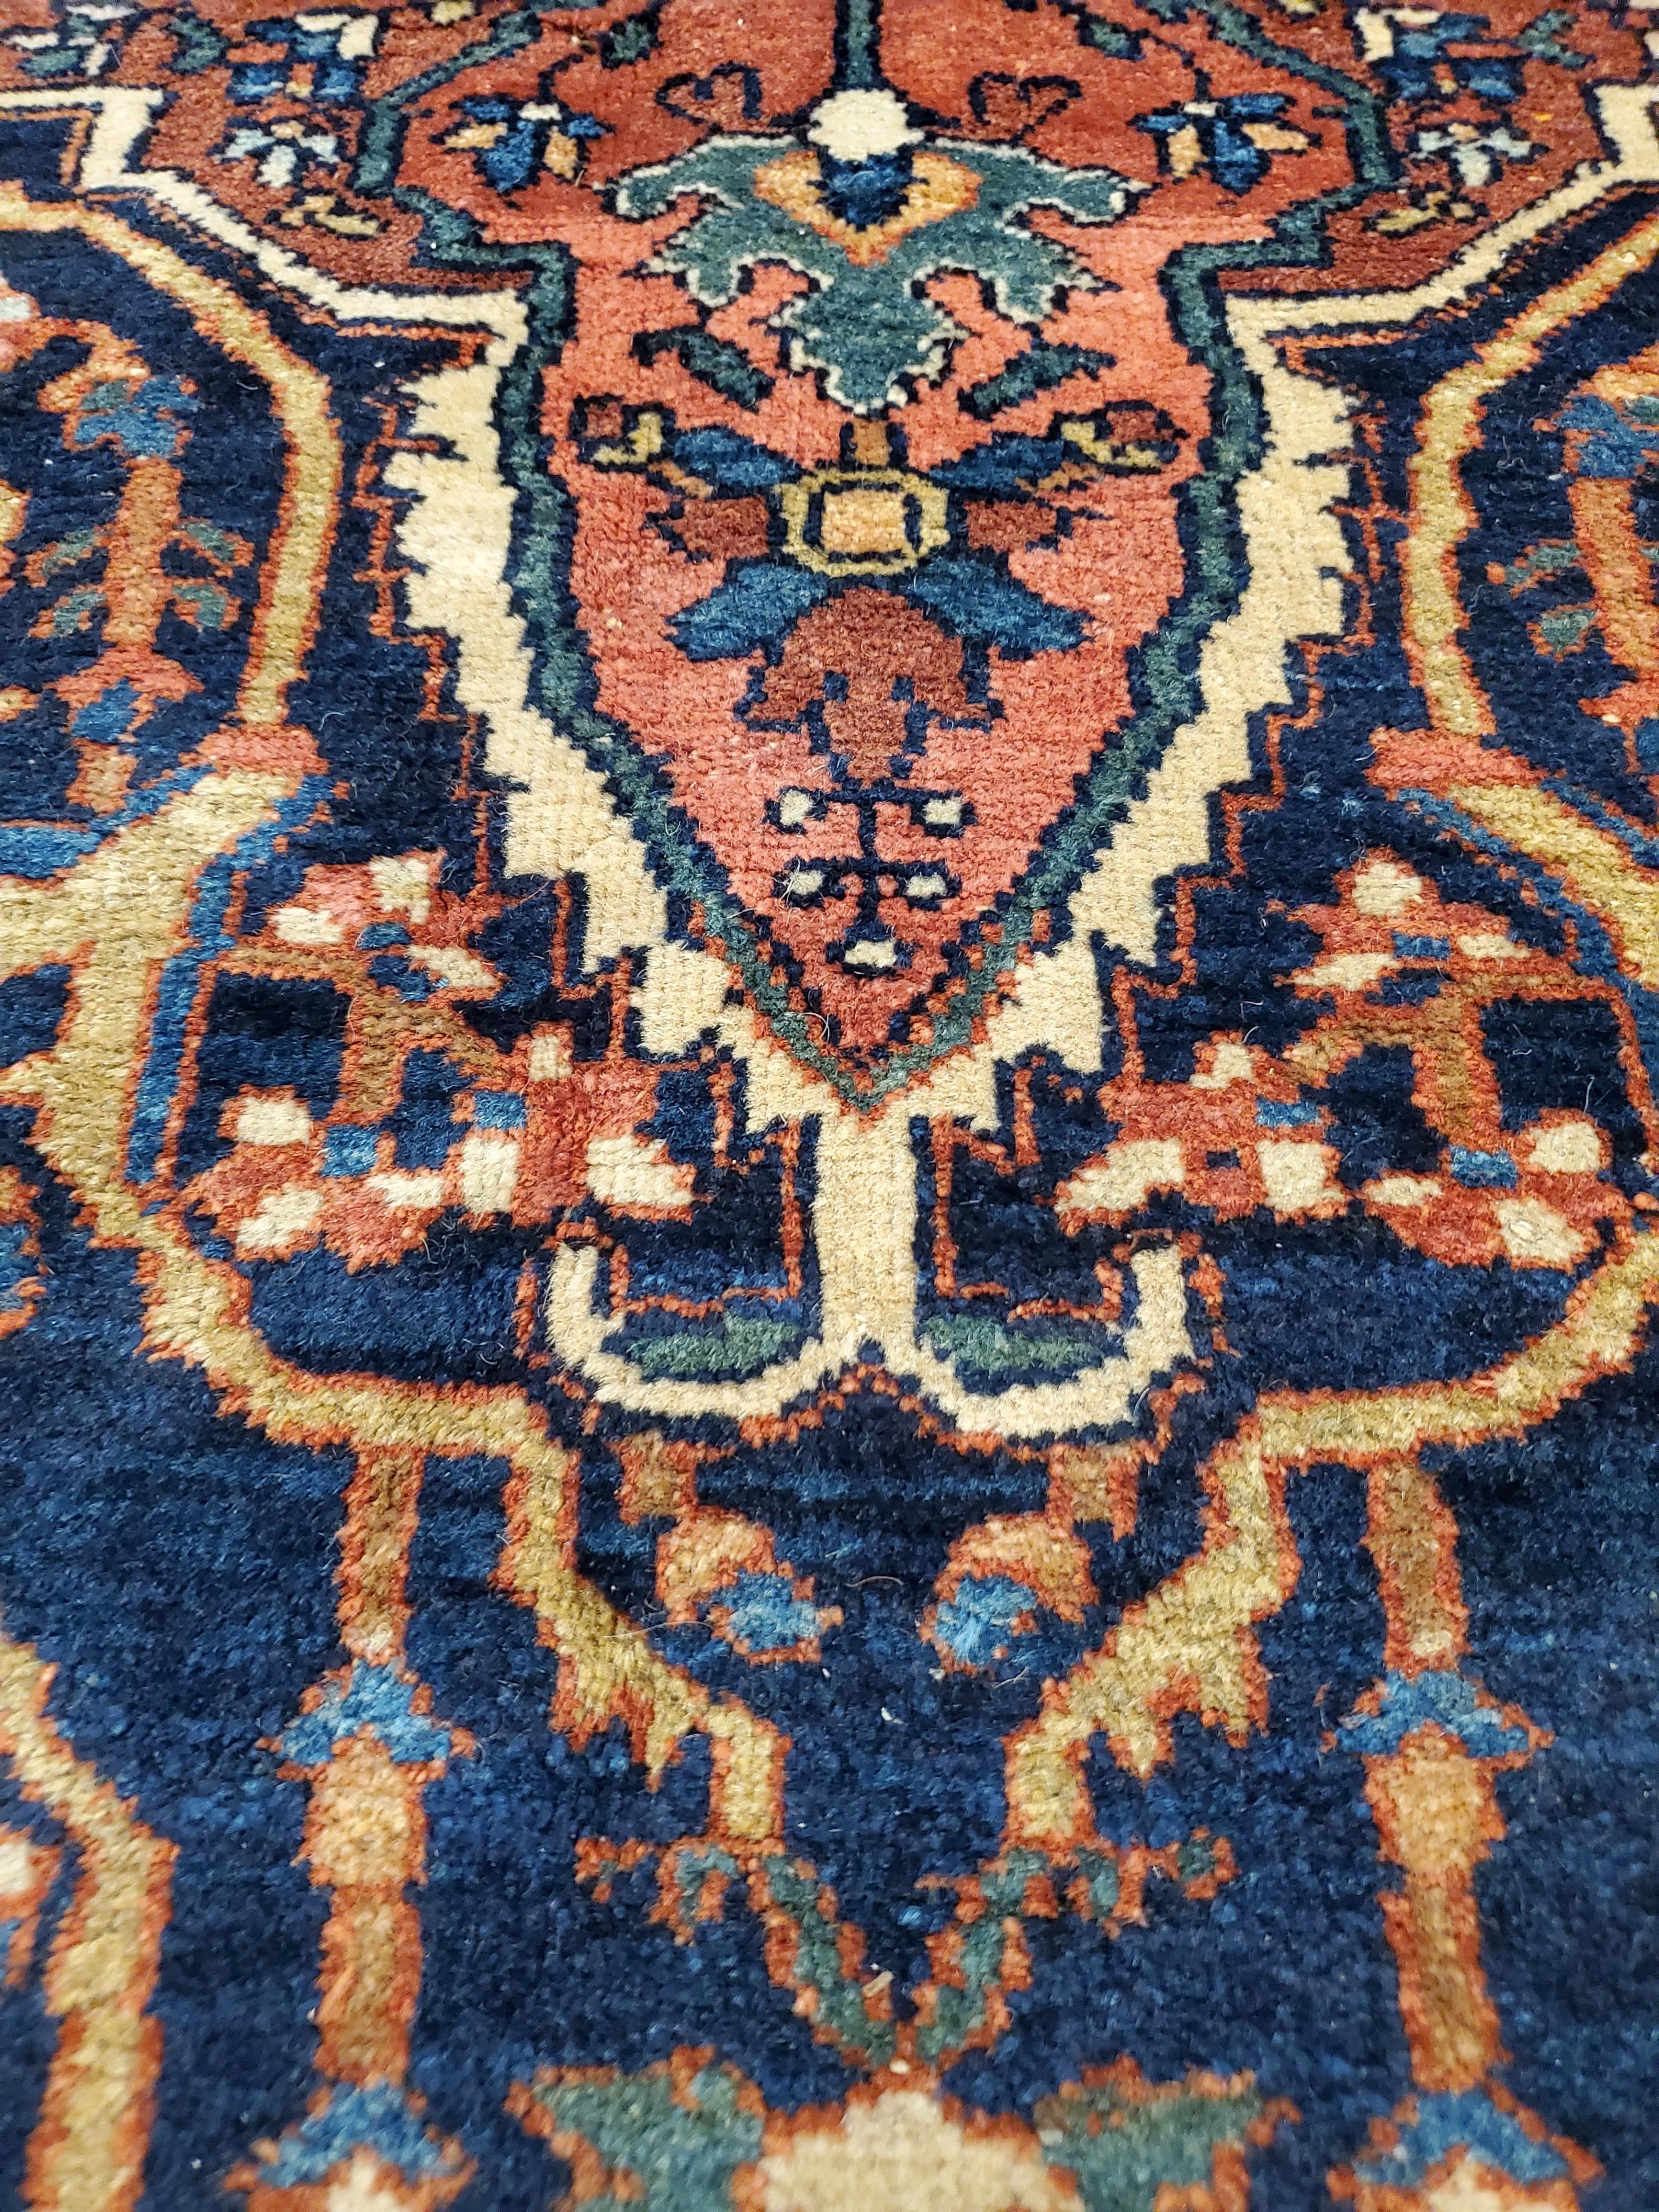 Antique Farahan Sarouk Carpet, Handmade Oriental Rug, Red, Navy, Fine Details In Good Condition For Sale In Port Washington, NY